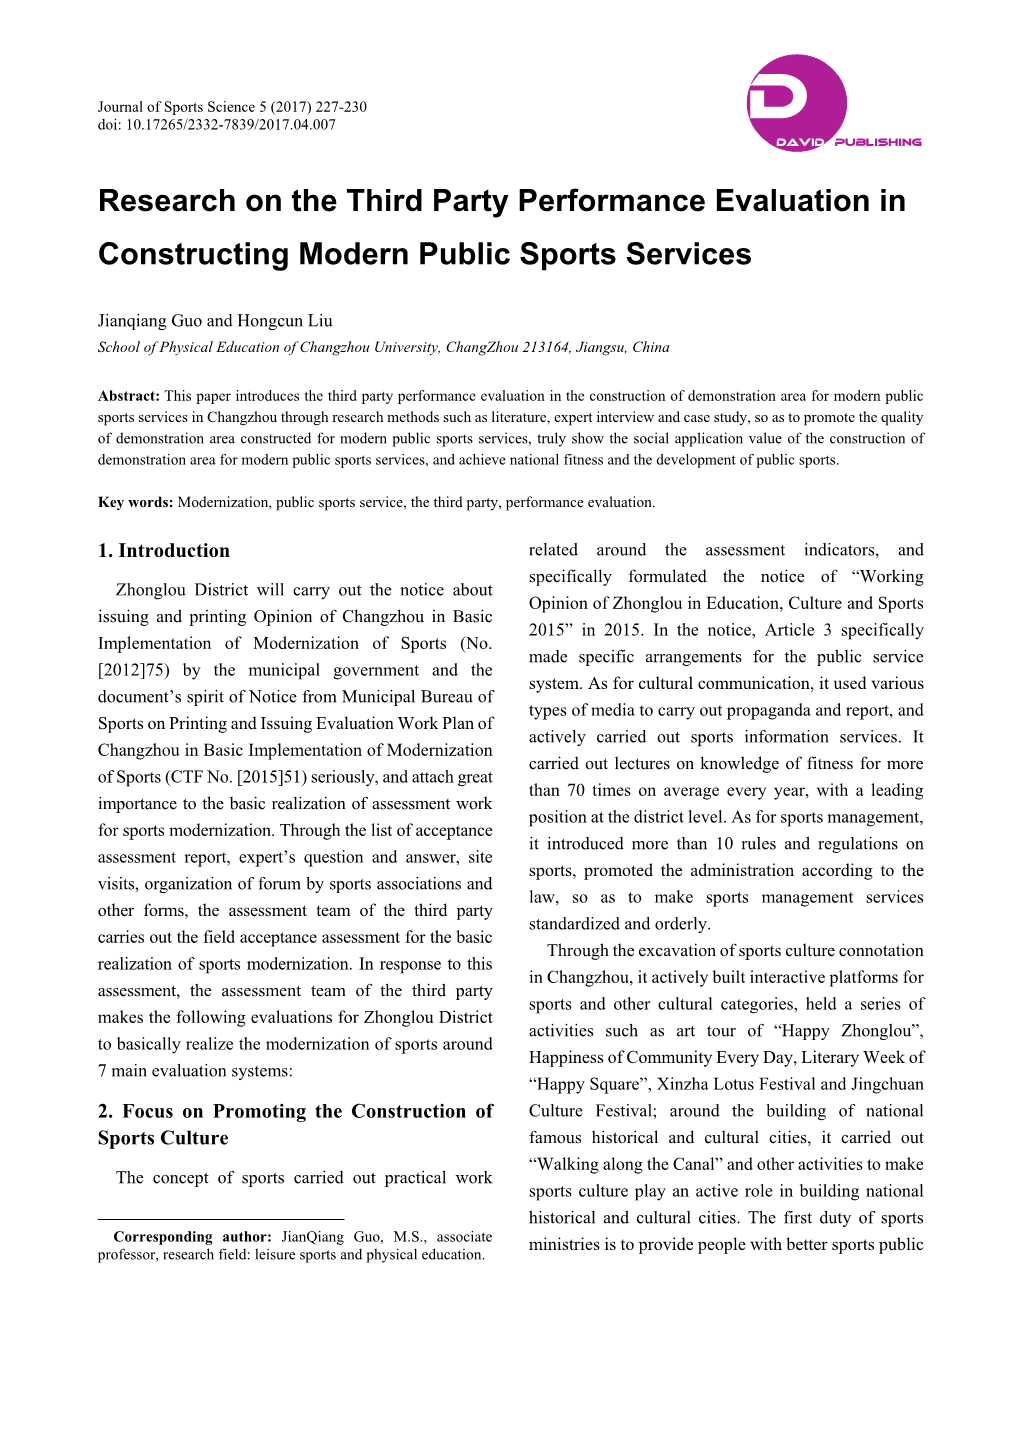 Research on the Third Party Performance Evaluation in Constructing Modern Public Sports Services